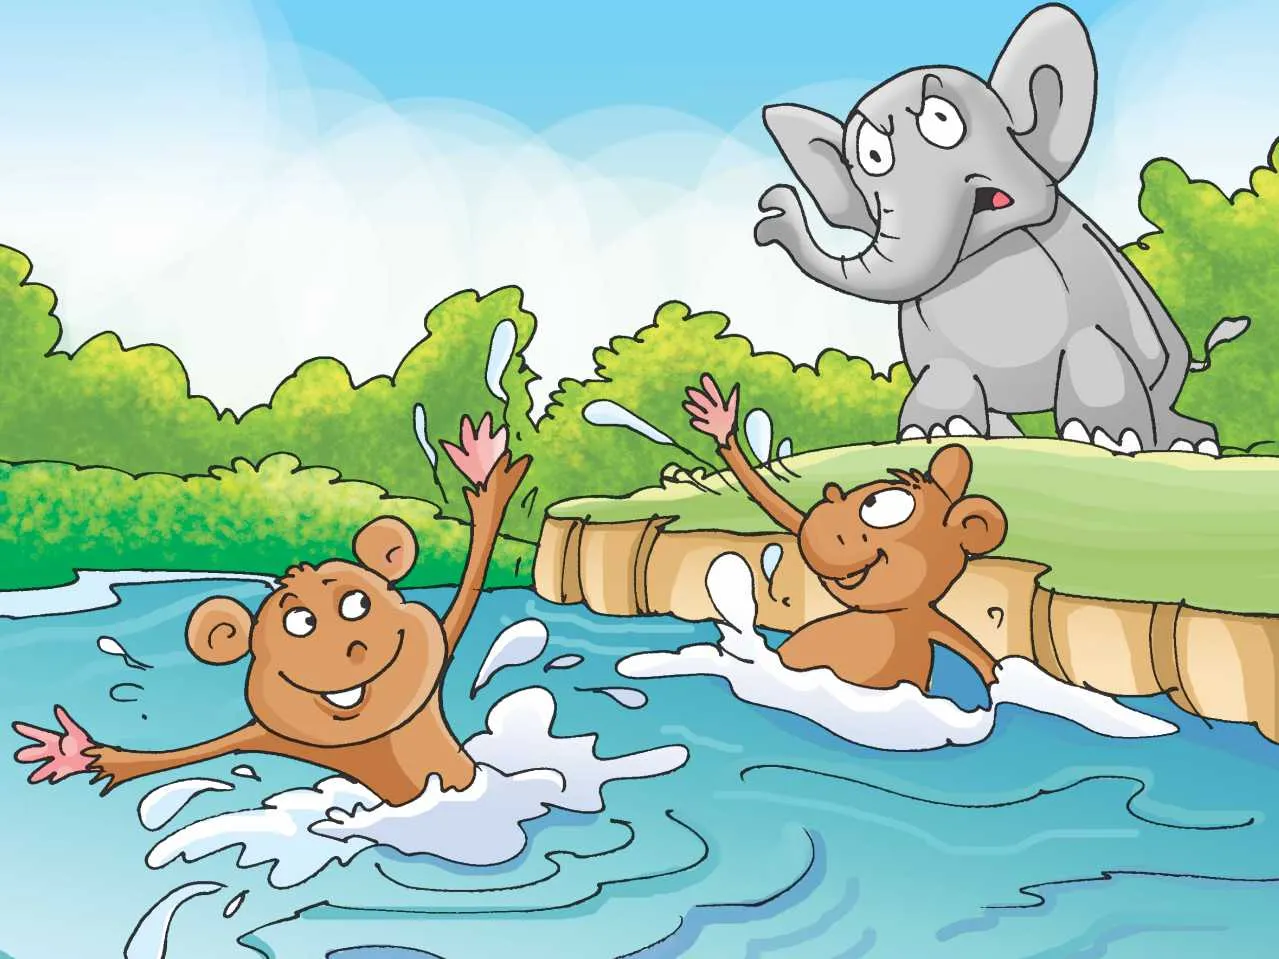 Monkey in water and elephant cartoon image